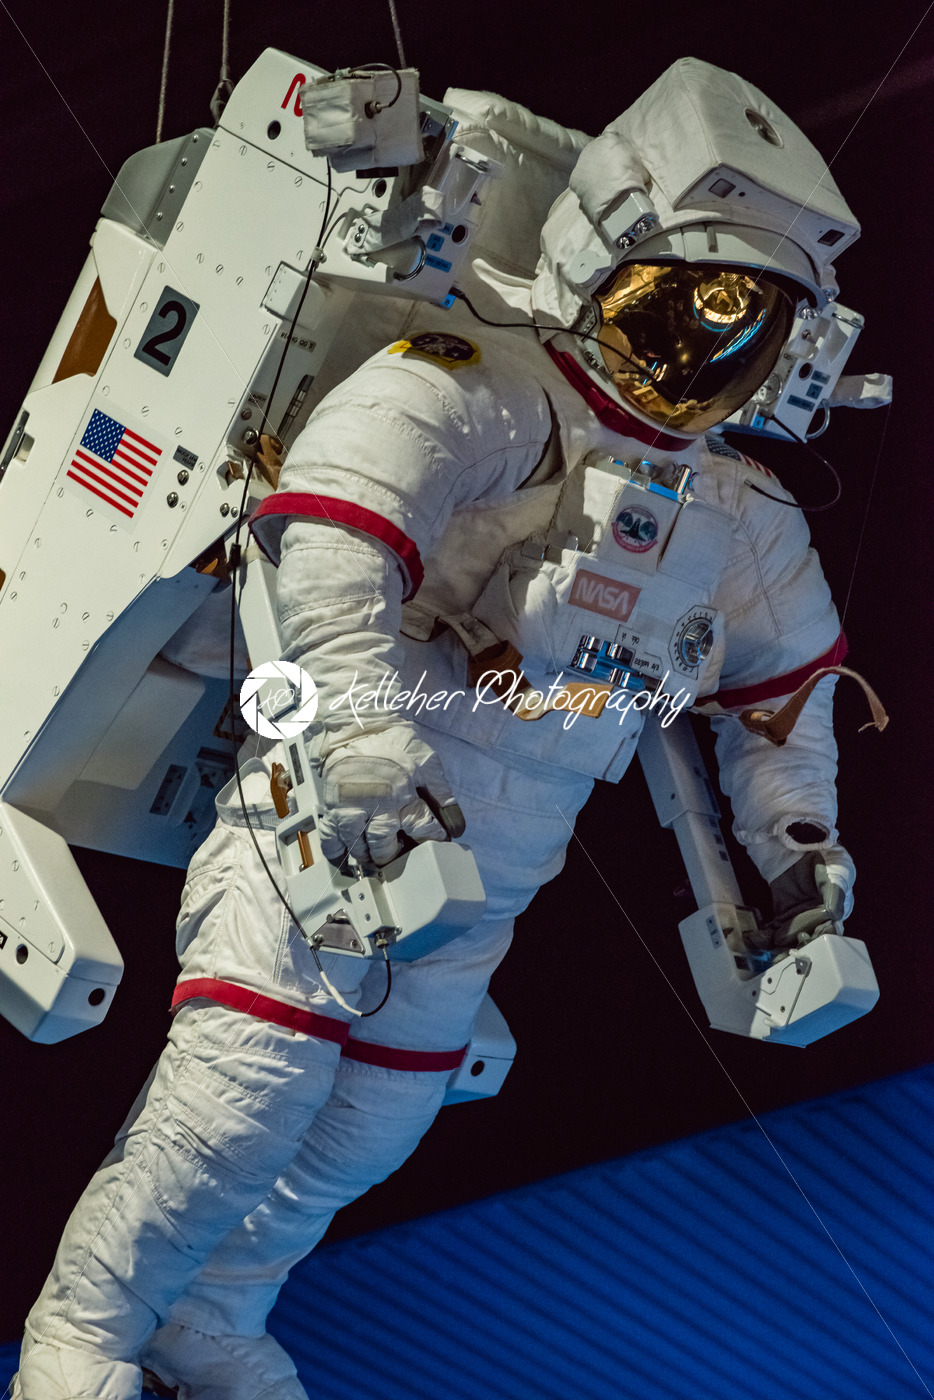 Cape Canaveral, Florida – August 13, 2018: Astronaut Suit at NASA Kennedy Space Center - Kelleher Photography Store